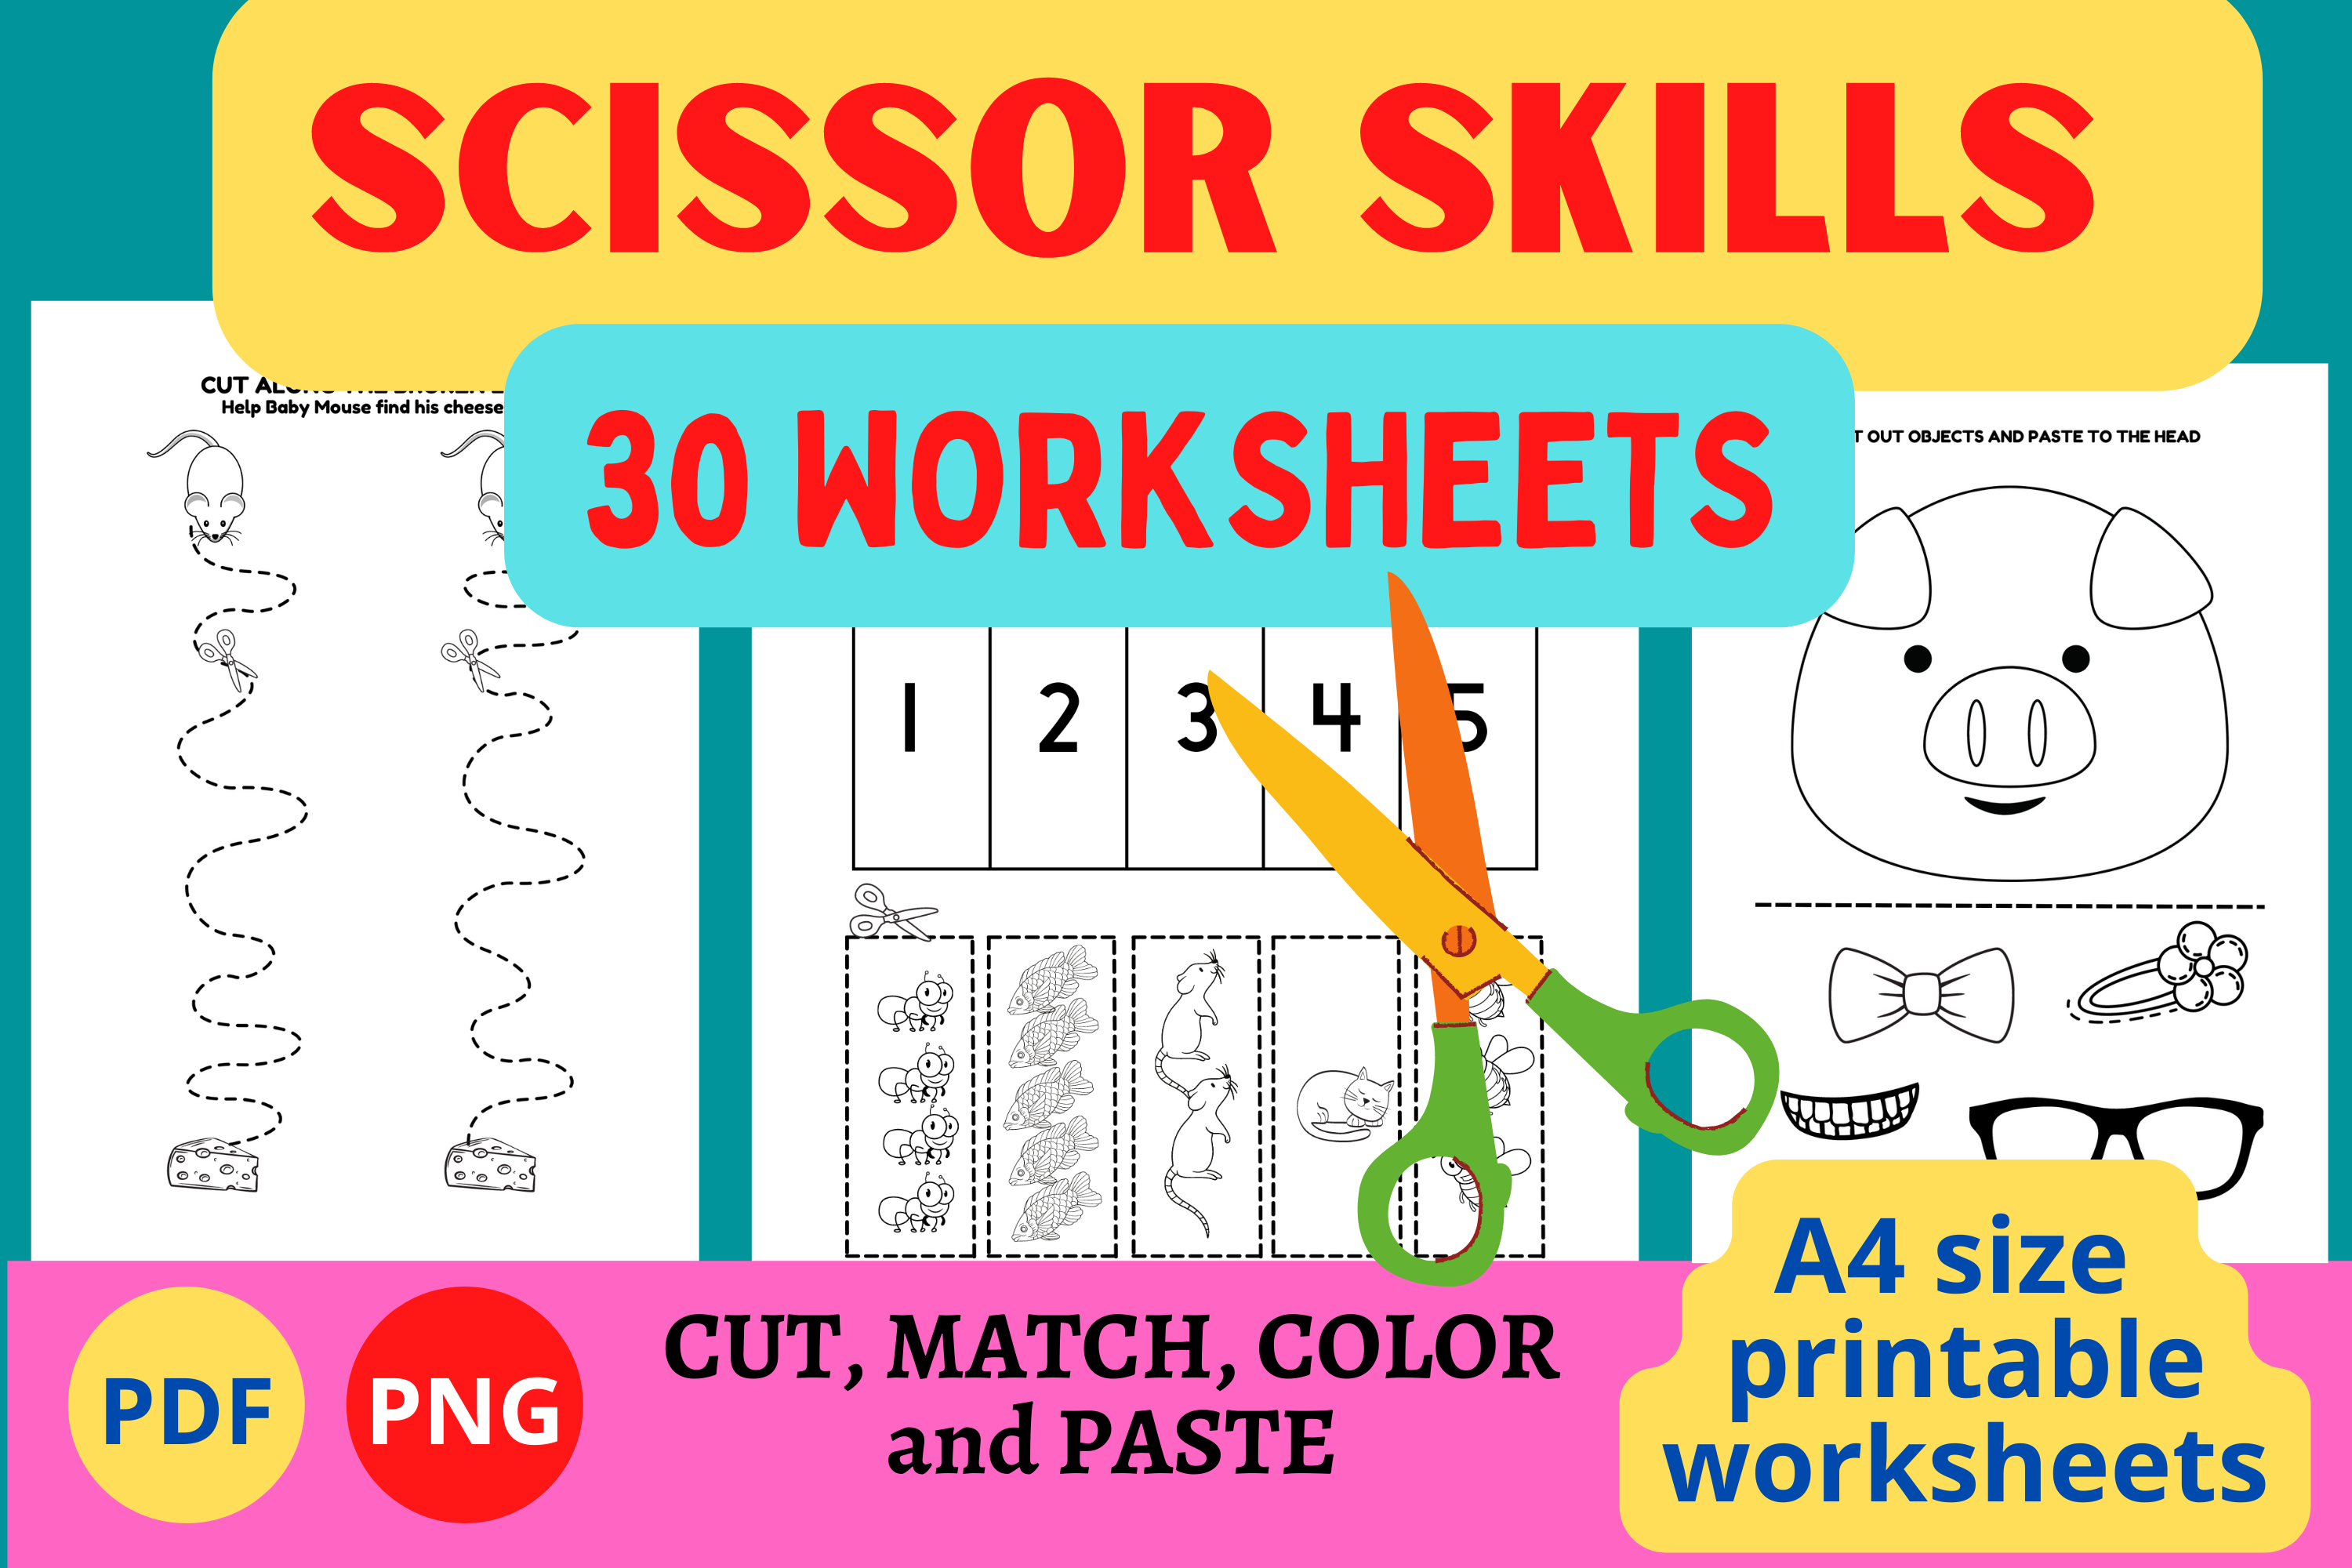 scissor skills for toddlers 2-4 years - Numbers, Shapes, Colors